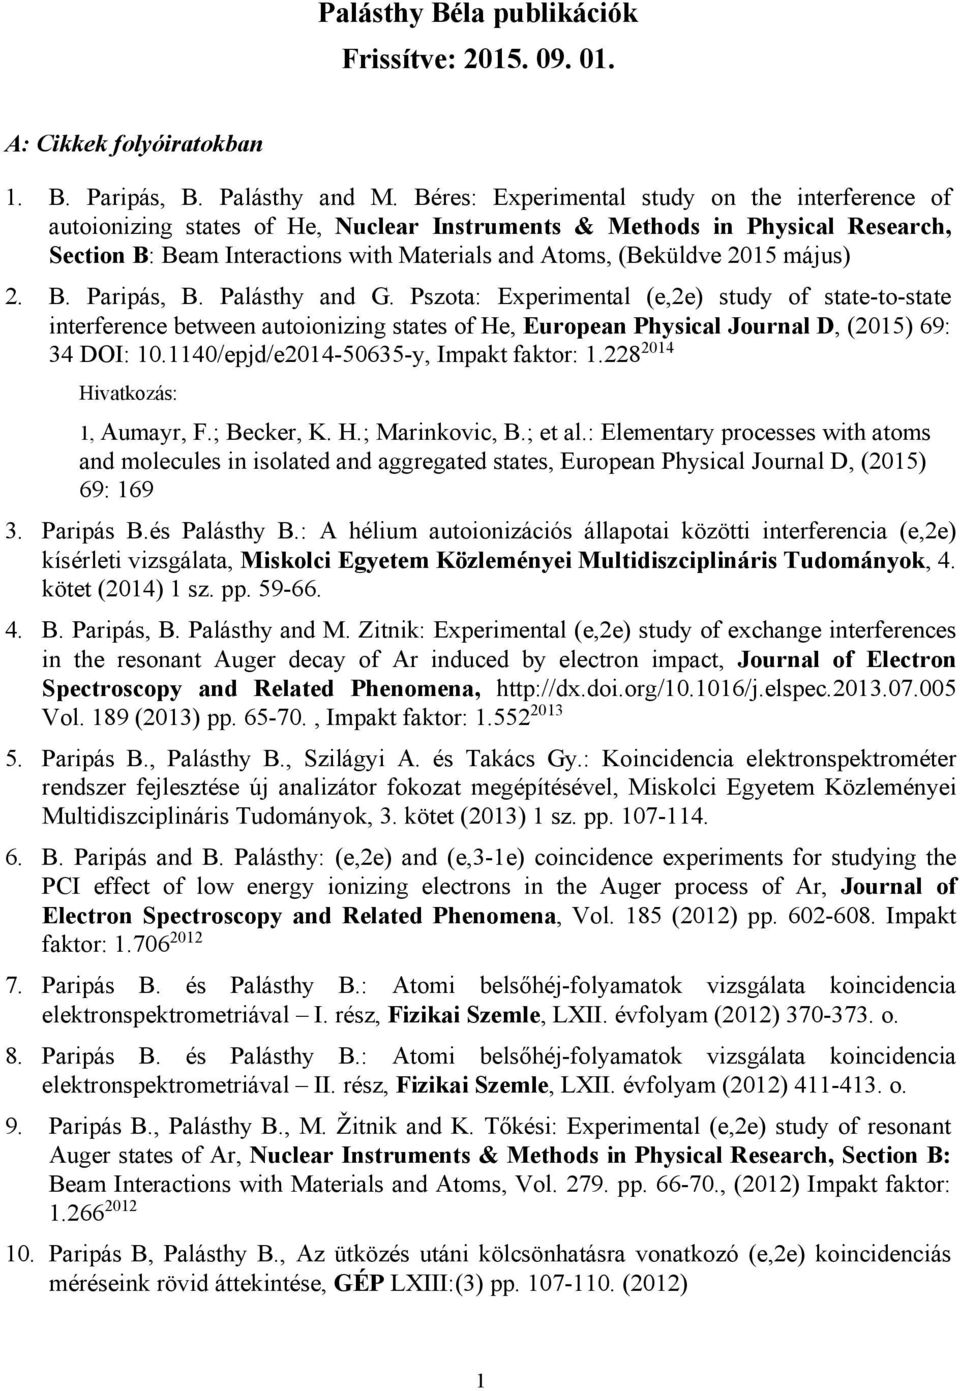 május) 2. B. Paripás, B. Palásthy and G. Pszota: Experimental (e,2e) study of state-to-state interference between autoionizing states of He, European Physical Journal D, (2015) 69: 34 DOI: 10.